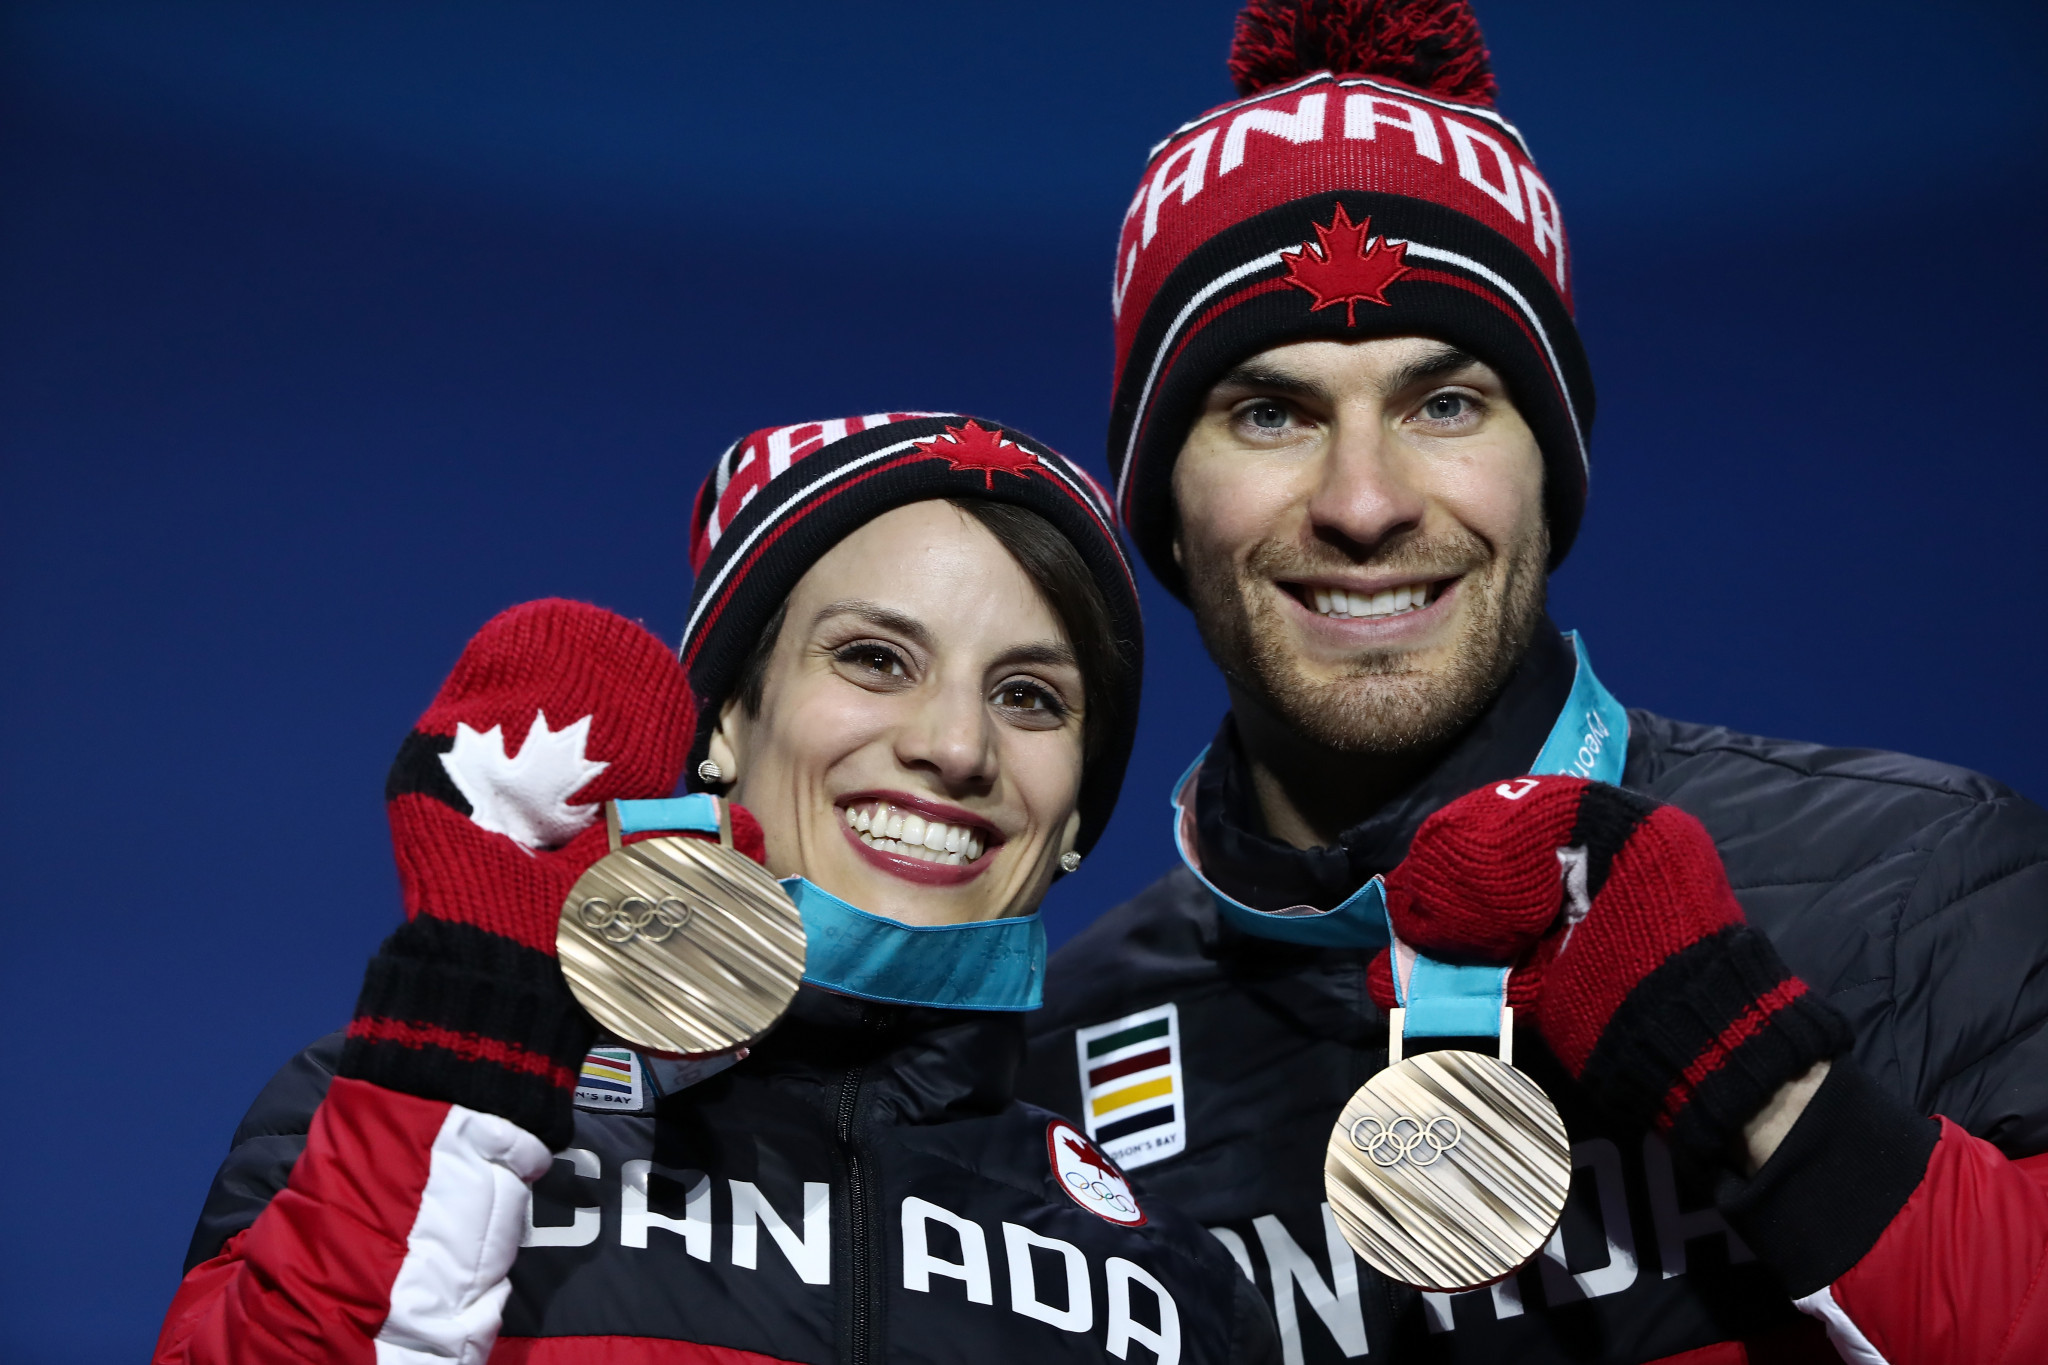 Meagan Duhamel and Eric Radford won bronze in the pairs event at Pyeongchang 2018 ©Getty Images